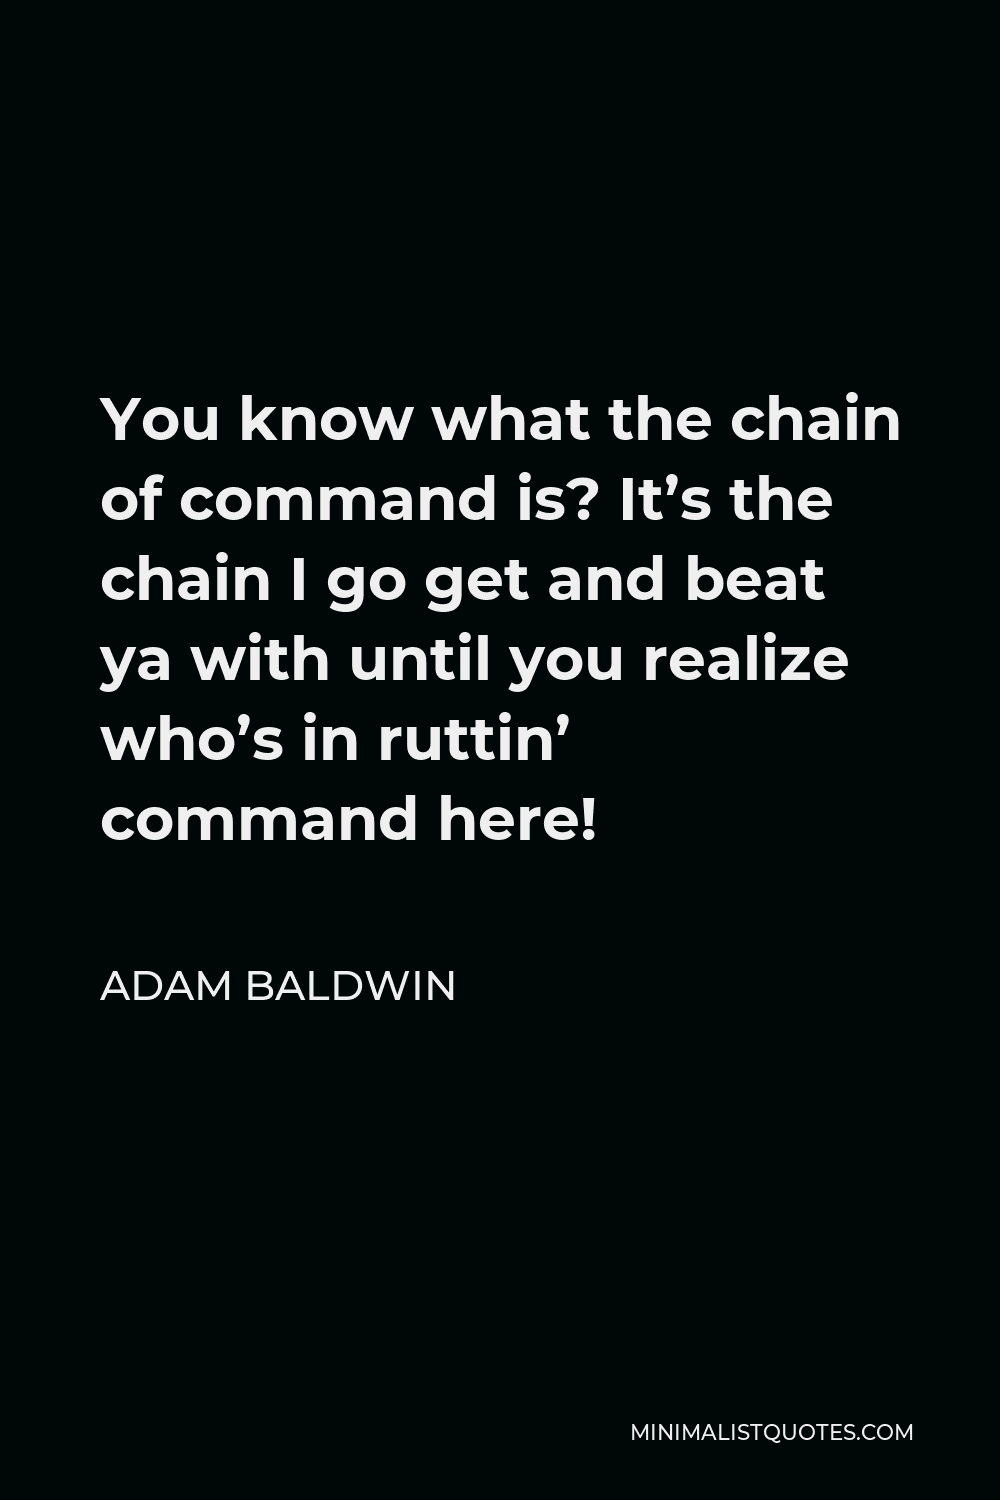 Adam Baldwin Quote - You know what the chain of command is? It’s the chain I go get and beat ya with until you realize who’s in ruttin’ command here!